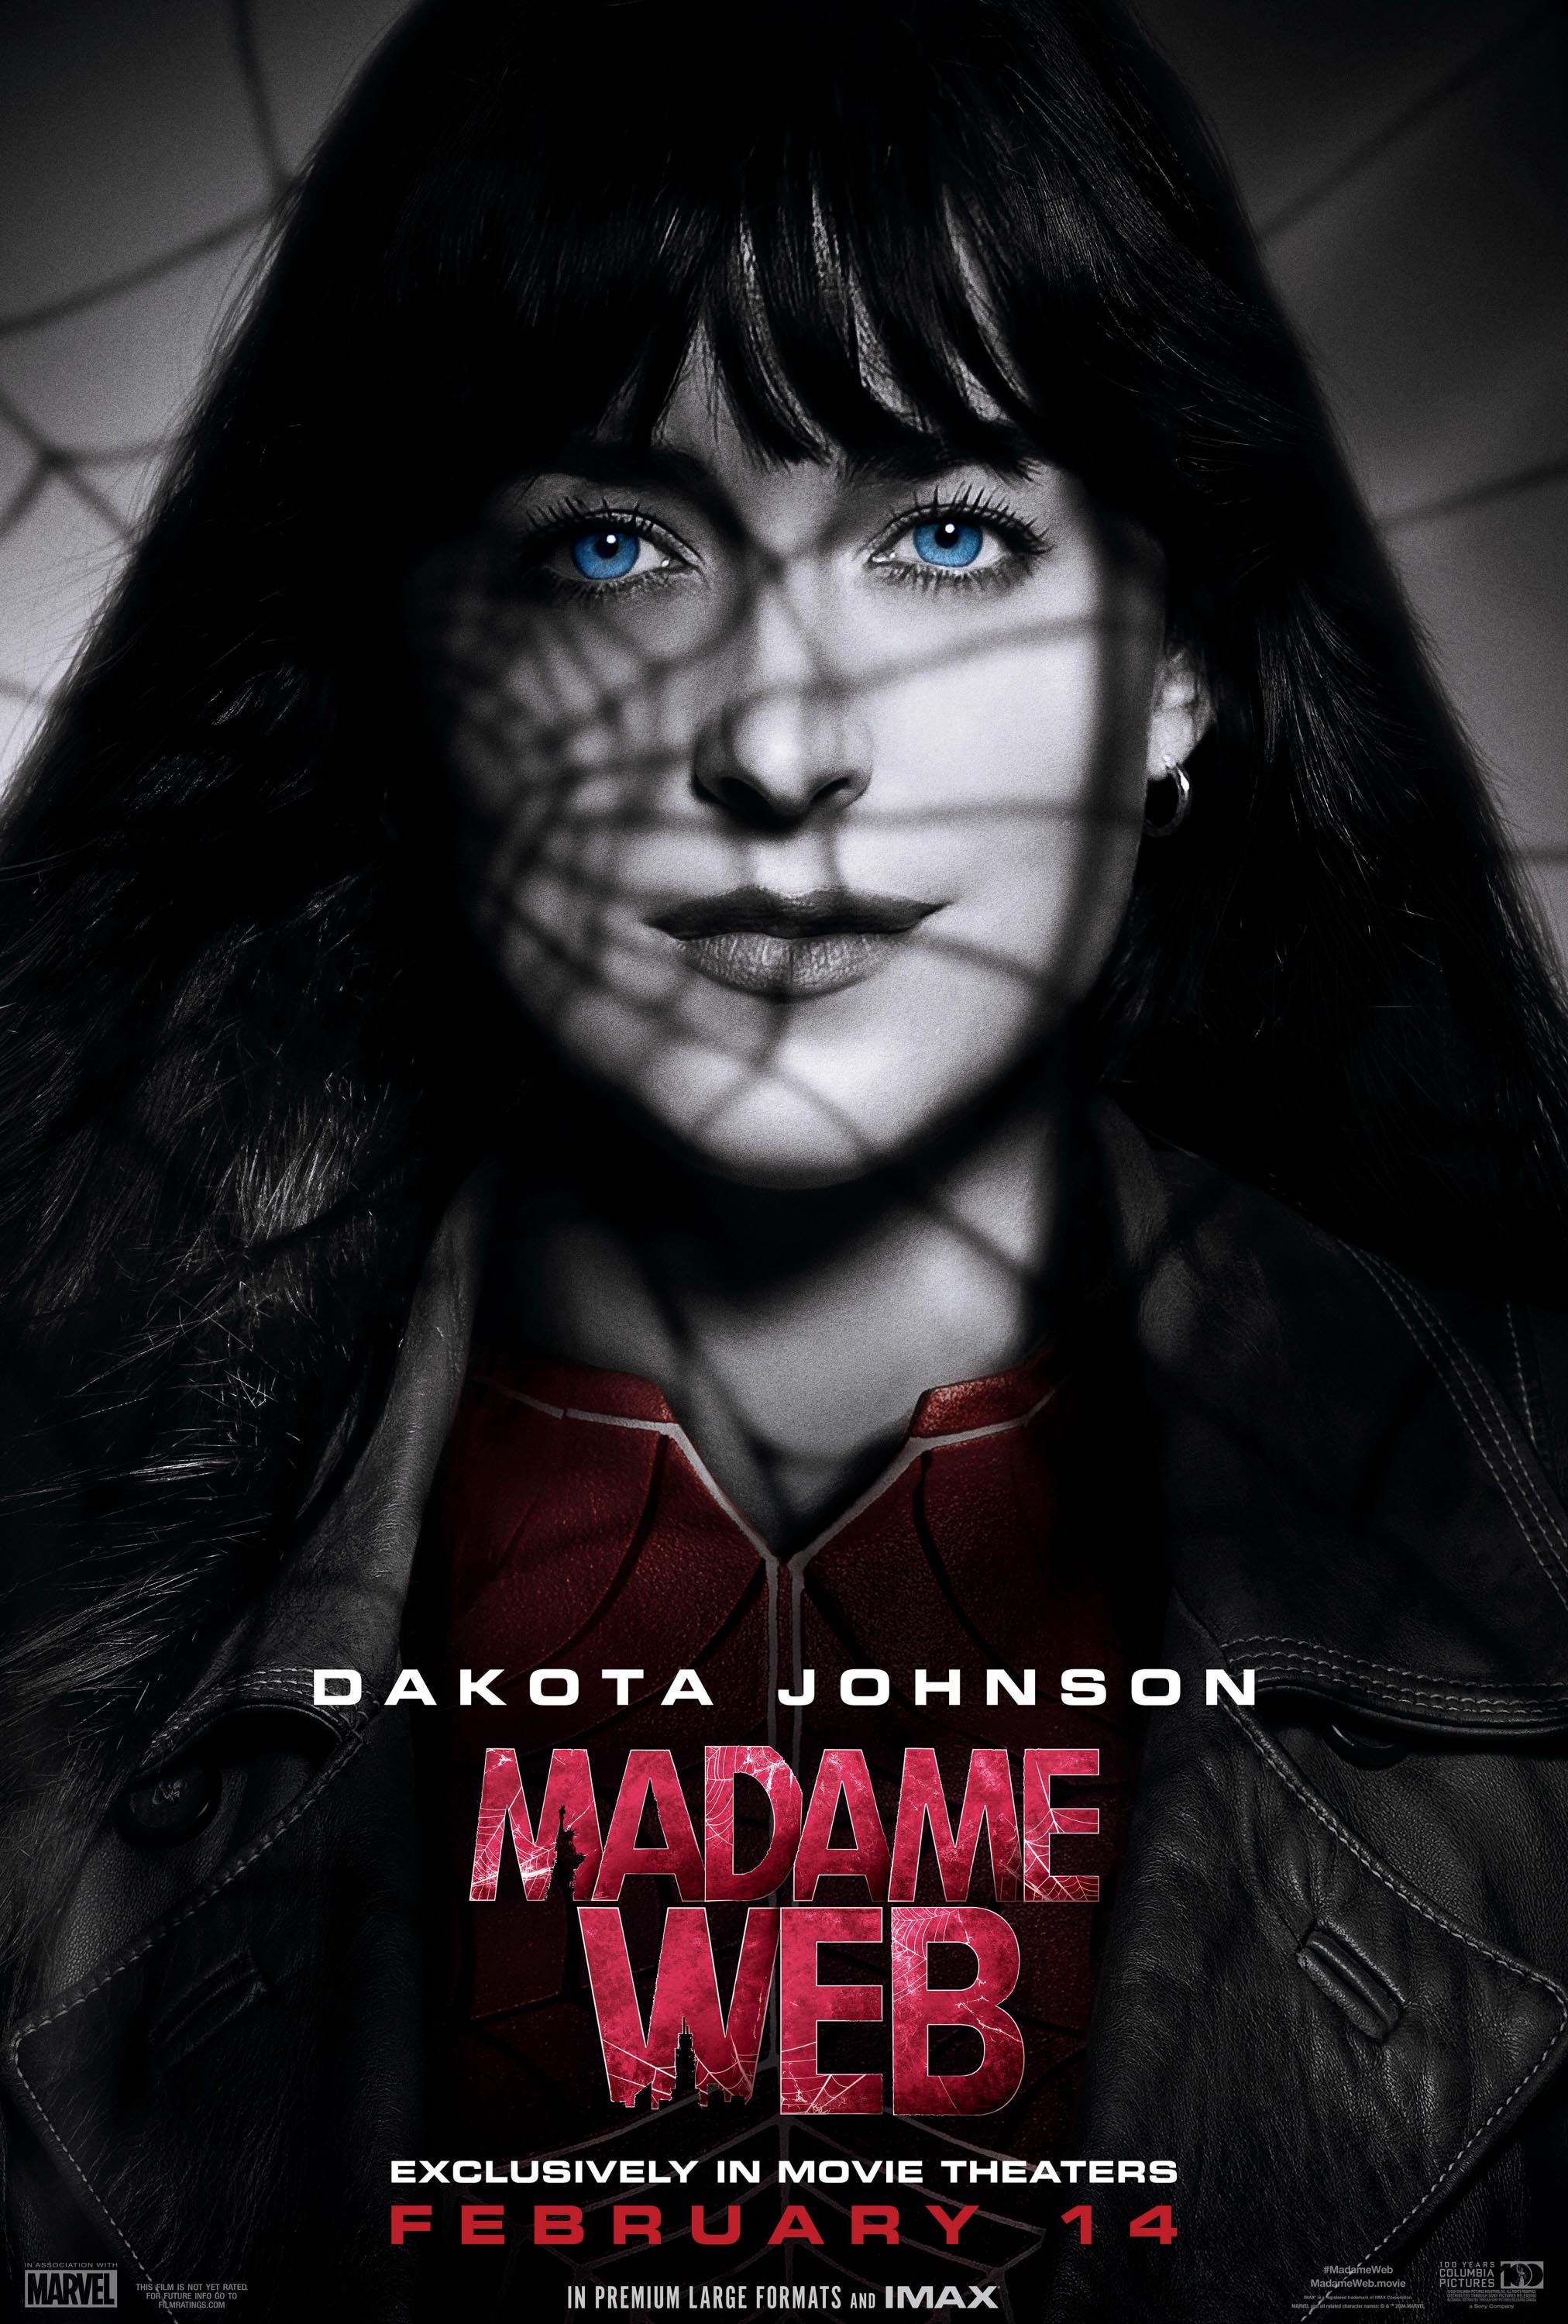 <p>"Madame Web" just might be the worst superhero film ever made. It had all the hallmarks of a major flop: a weak premise, clunky dialogue and spectacularly bad acting from some of our favorite young actresses (<a href="https://www.wonderwall.com/celebrity/profiles/overview/dakota-johnson-1554.article">Dakota Johnson</a> and Sydney Sweeney among them). The action flick -- which is based on a supporting character from Marvel's Spider-Man comics -- banked $100M at the box office on a budget of $80M and scored a dismal 12% rotten rating with critics on Rotten Tomatoes. Yikes.</p>